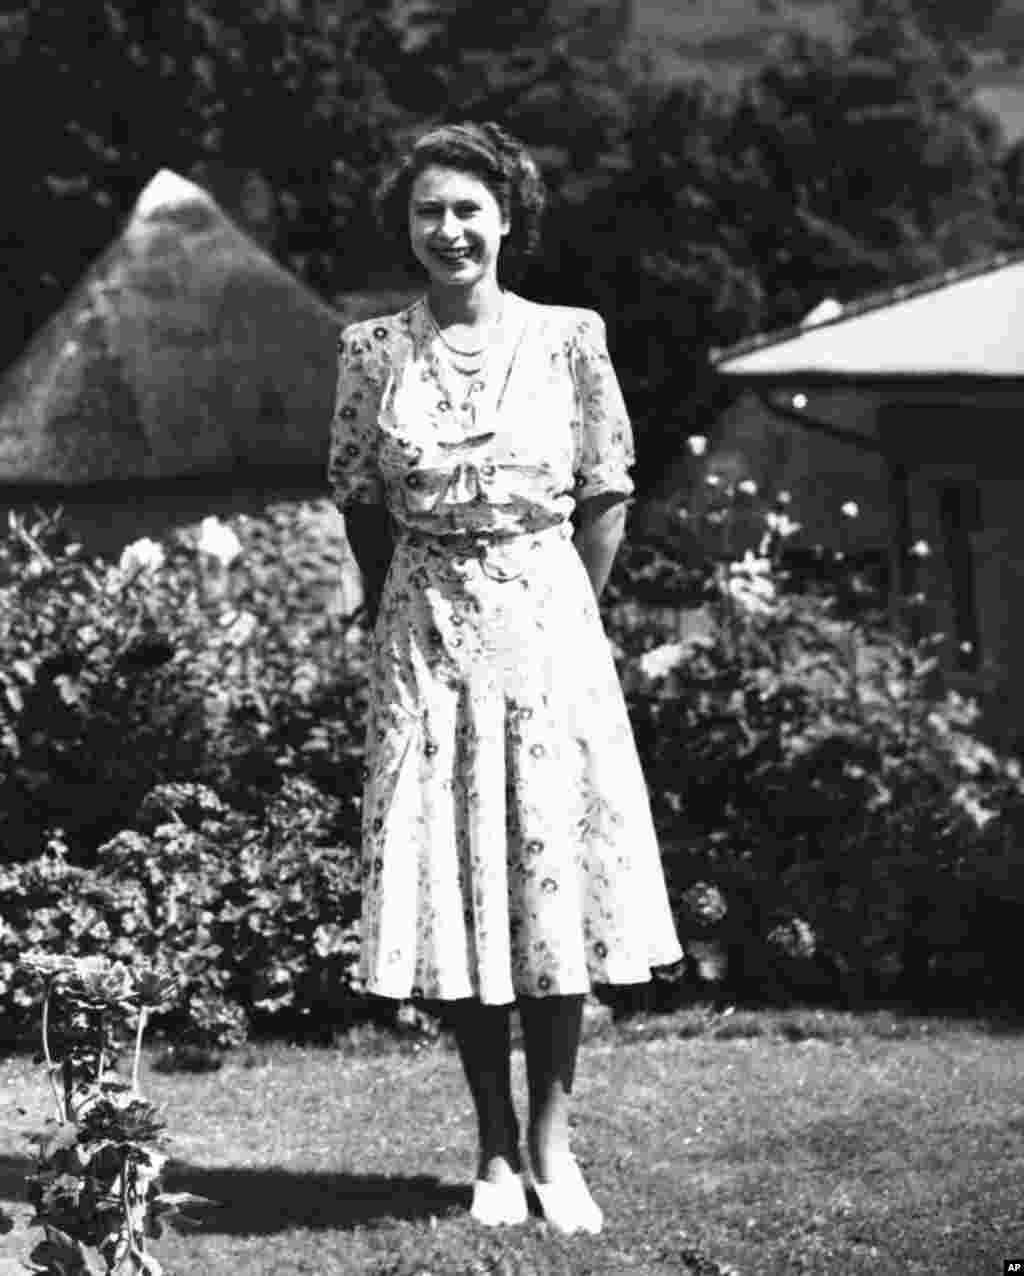 Queen Elizabeth II, then Princess Elizabeth, poses for her 21st birthday release picture, during a three day rest in the Natal National Park in South Africa on April 11, 1947. (AP Photo)